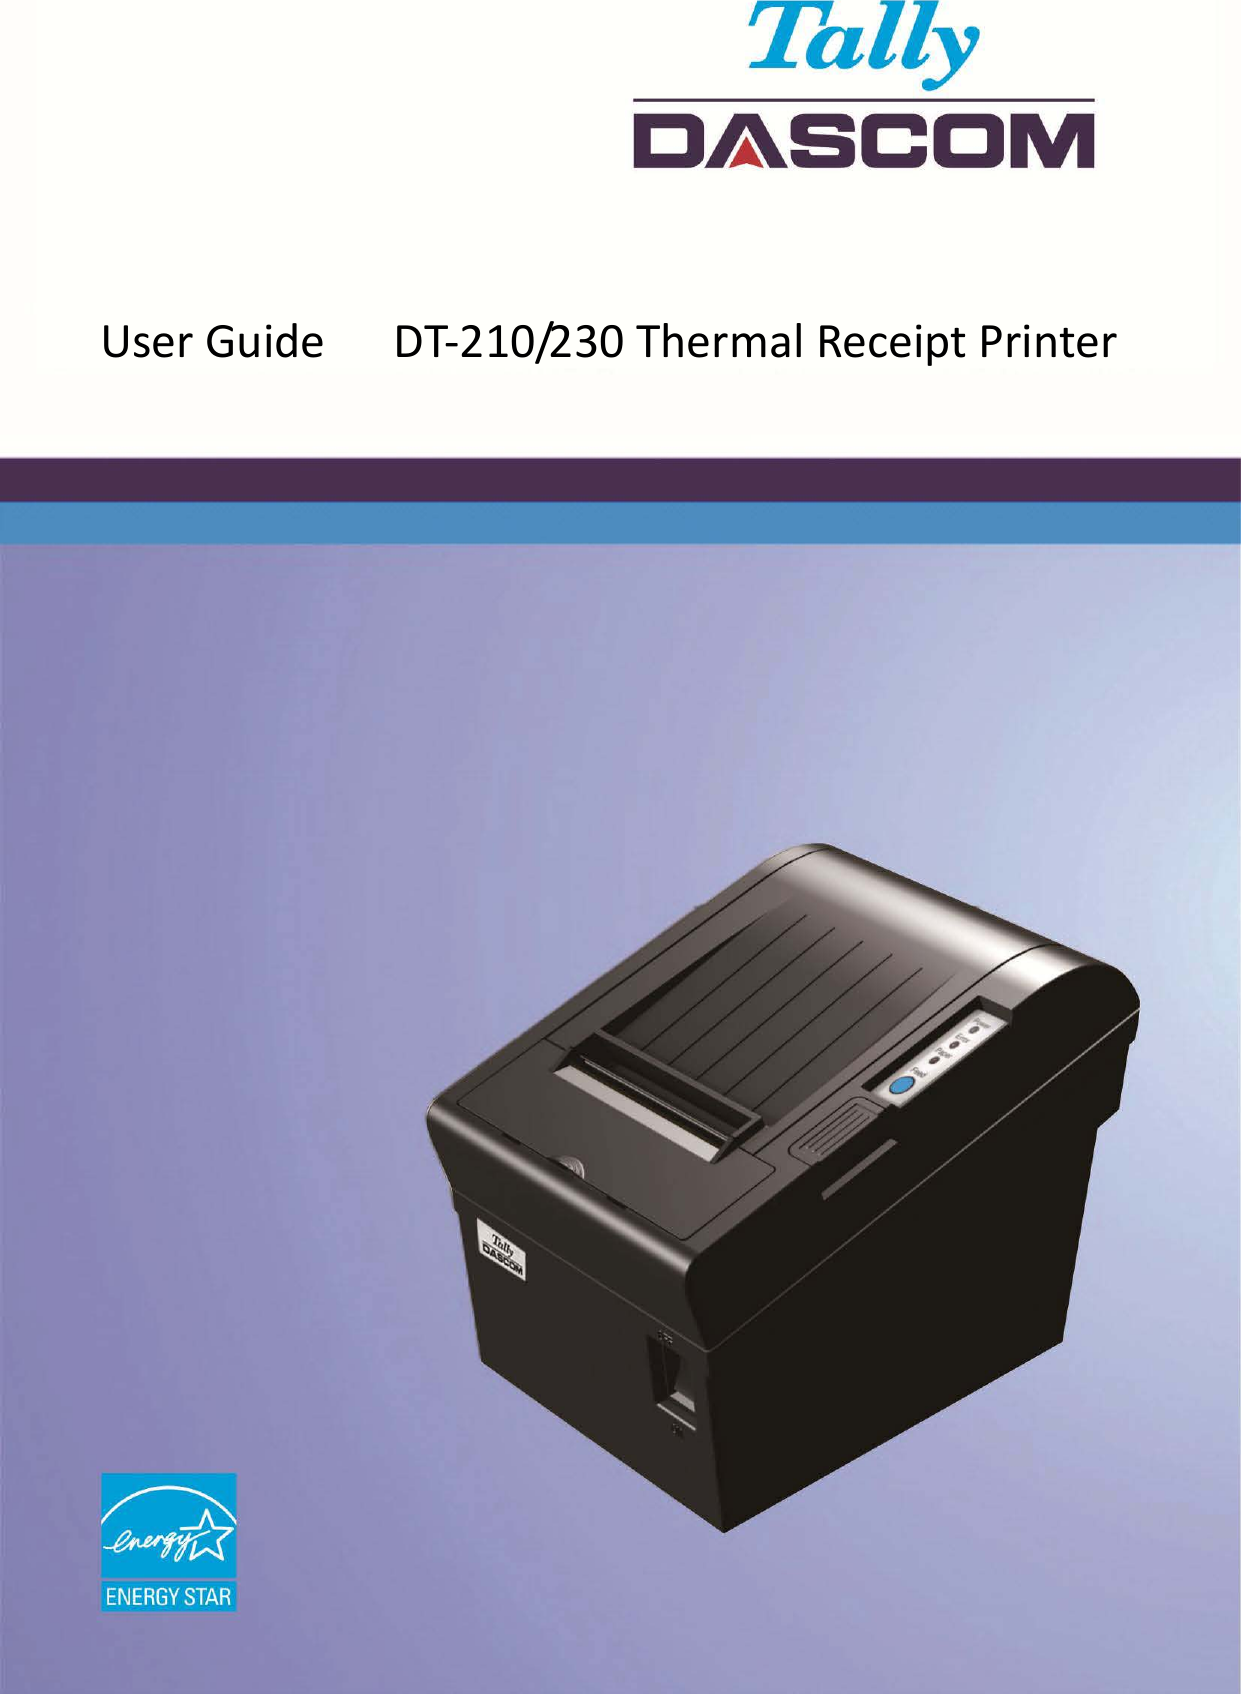                User Guide    DT-210/230 Thermal Receipt Printer